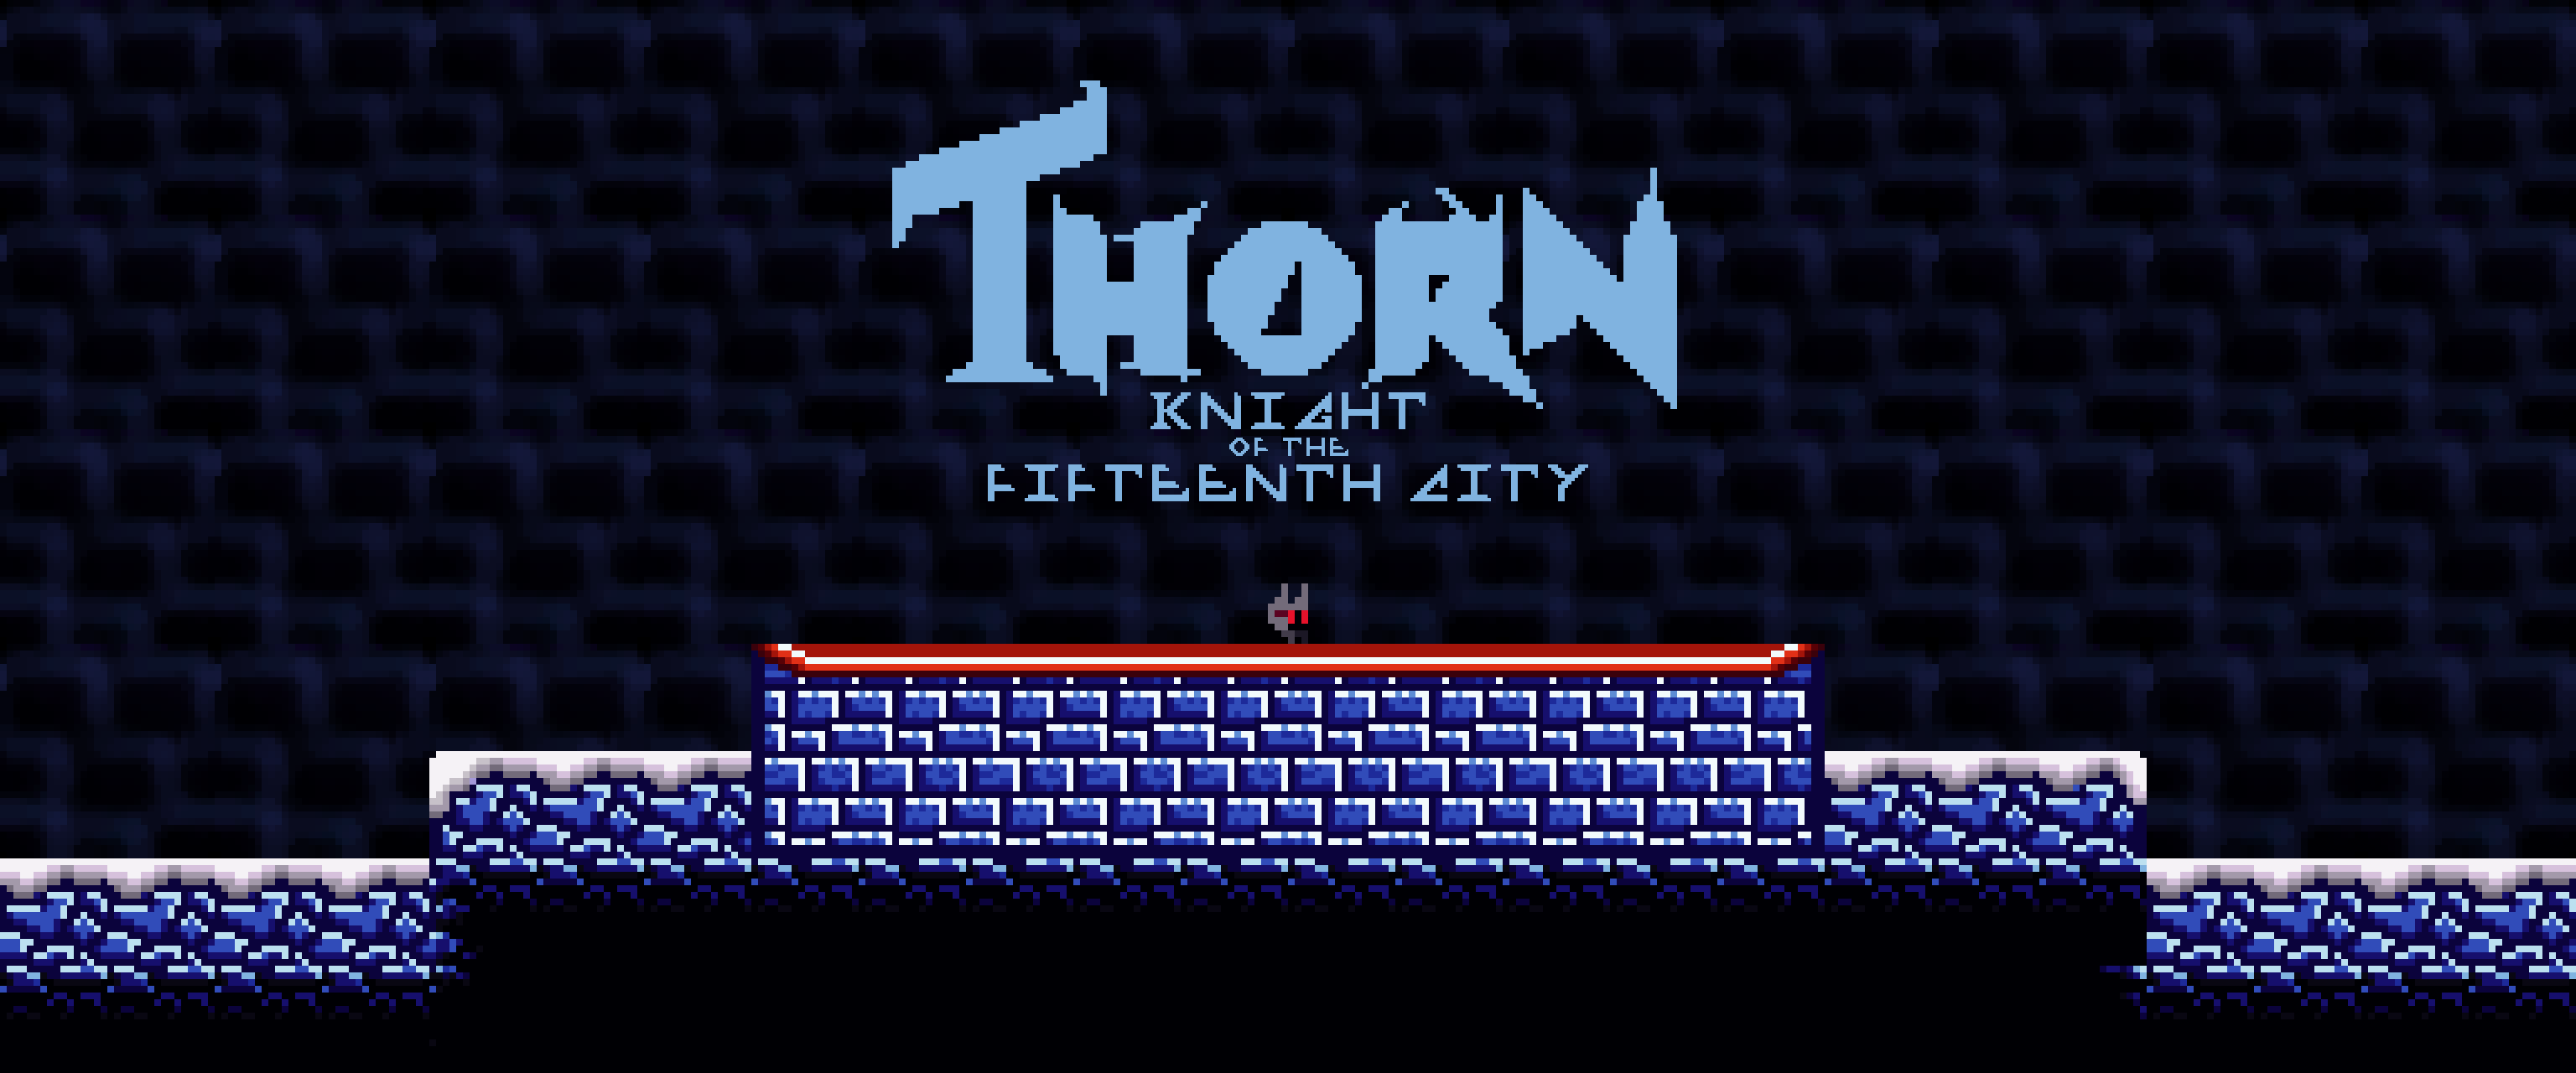 Thorn: The Knight of the Fifteenth City